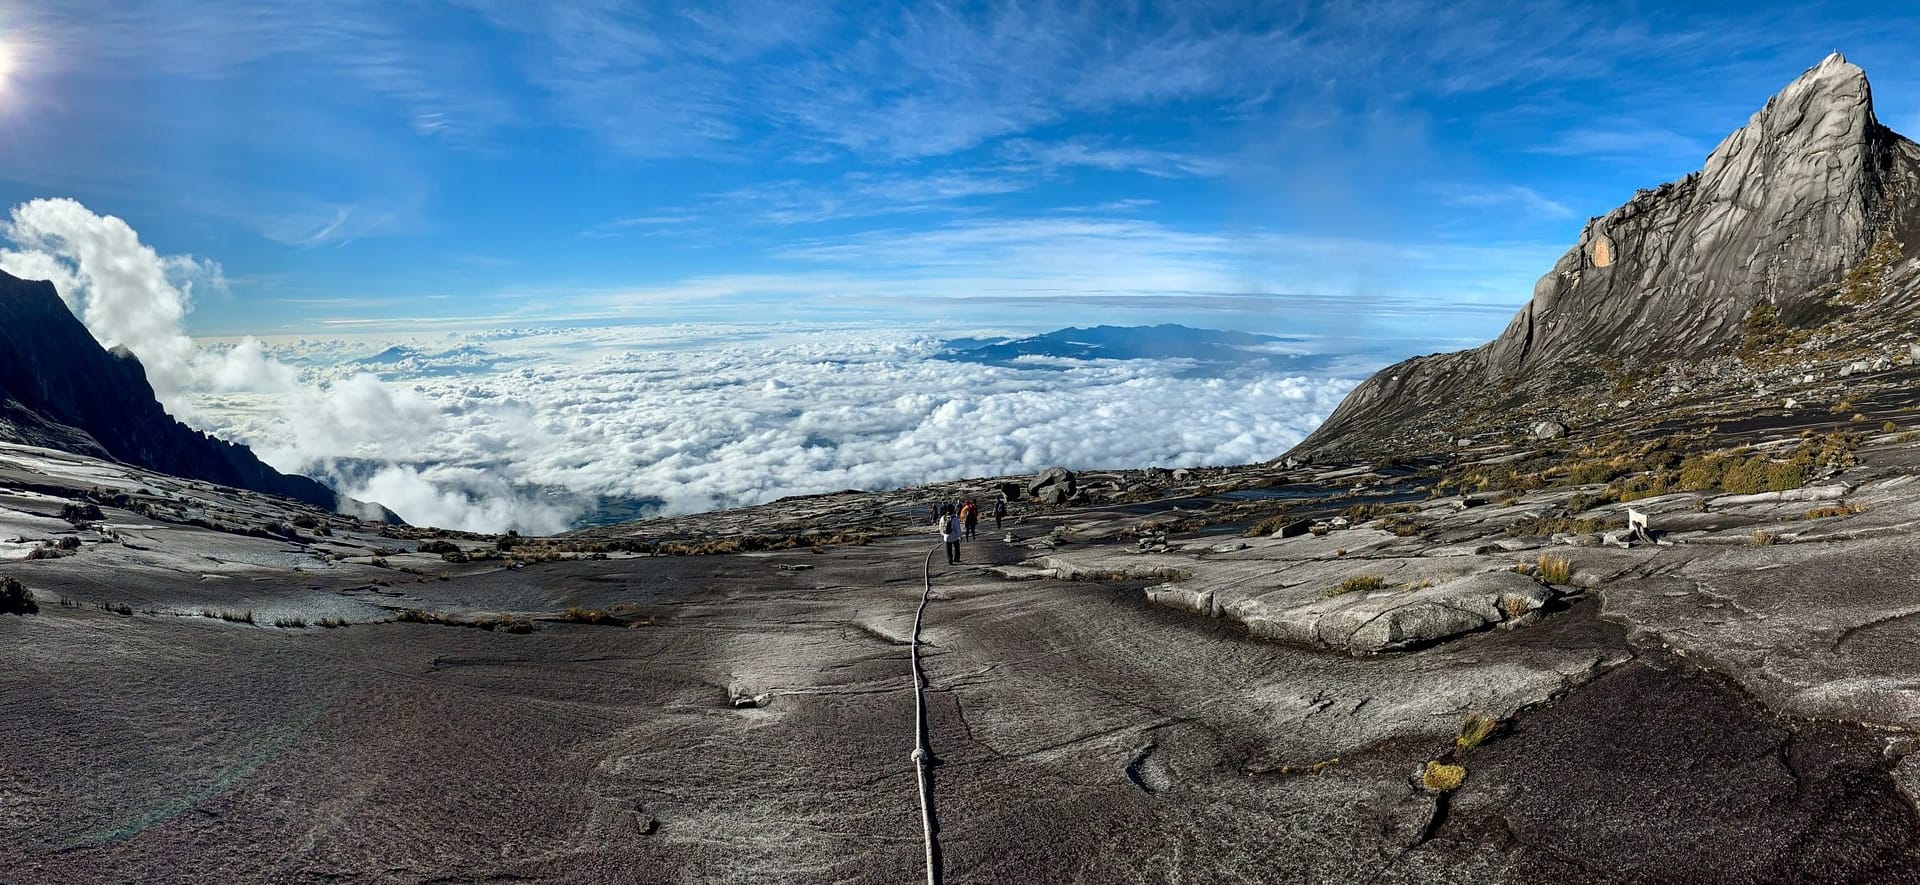 view from Mount Kinabalu